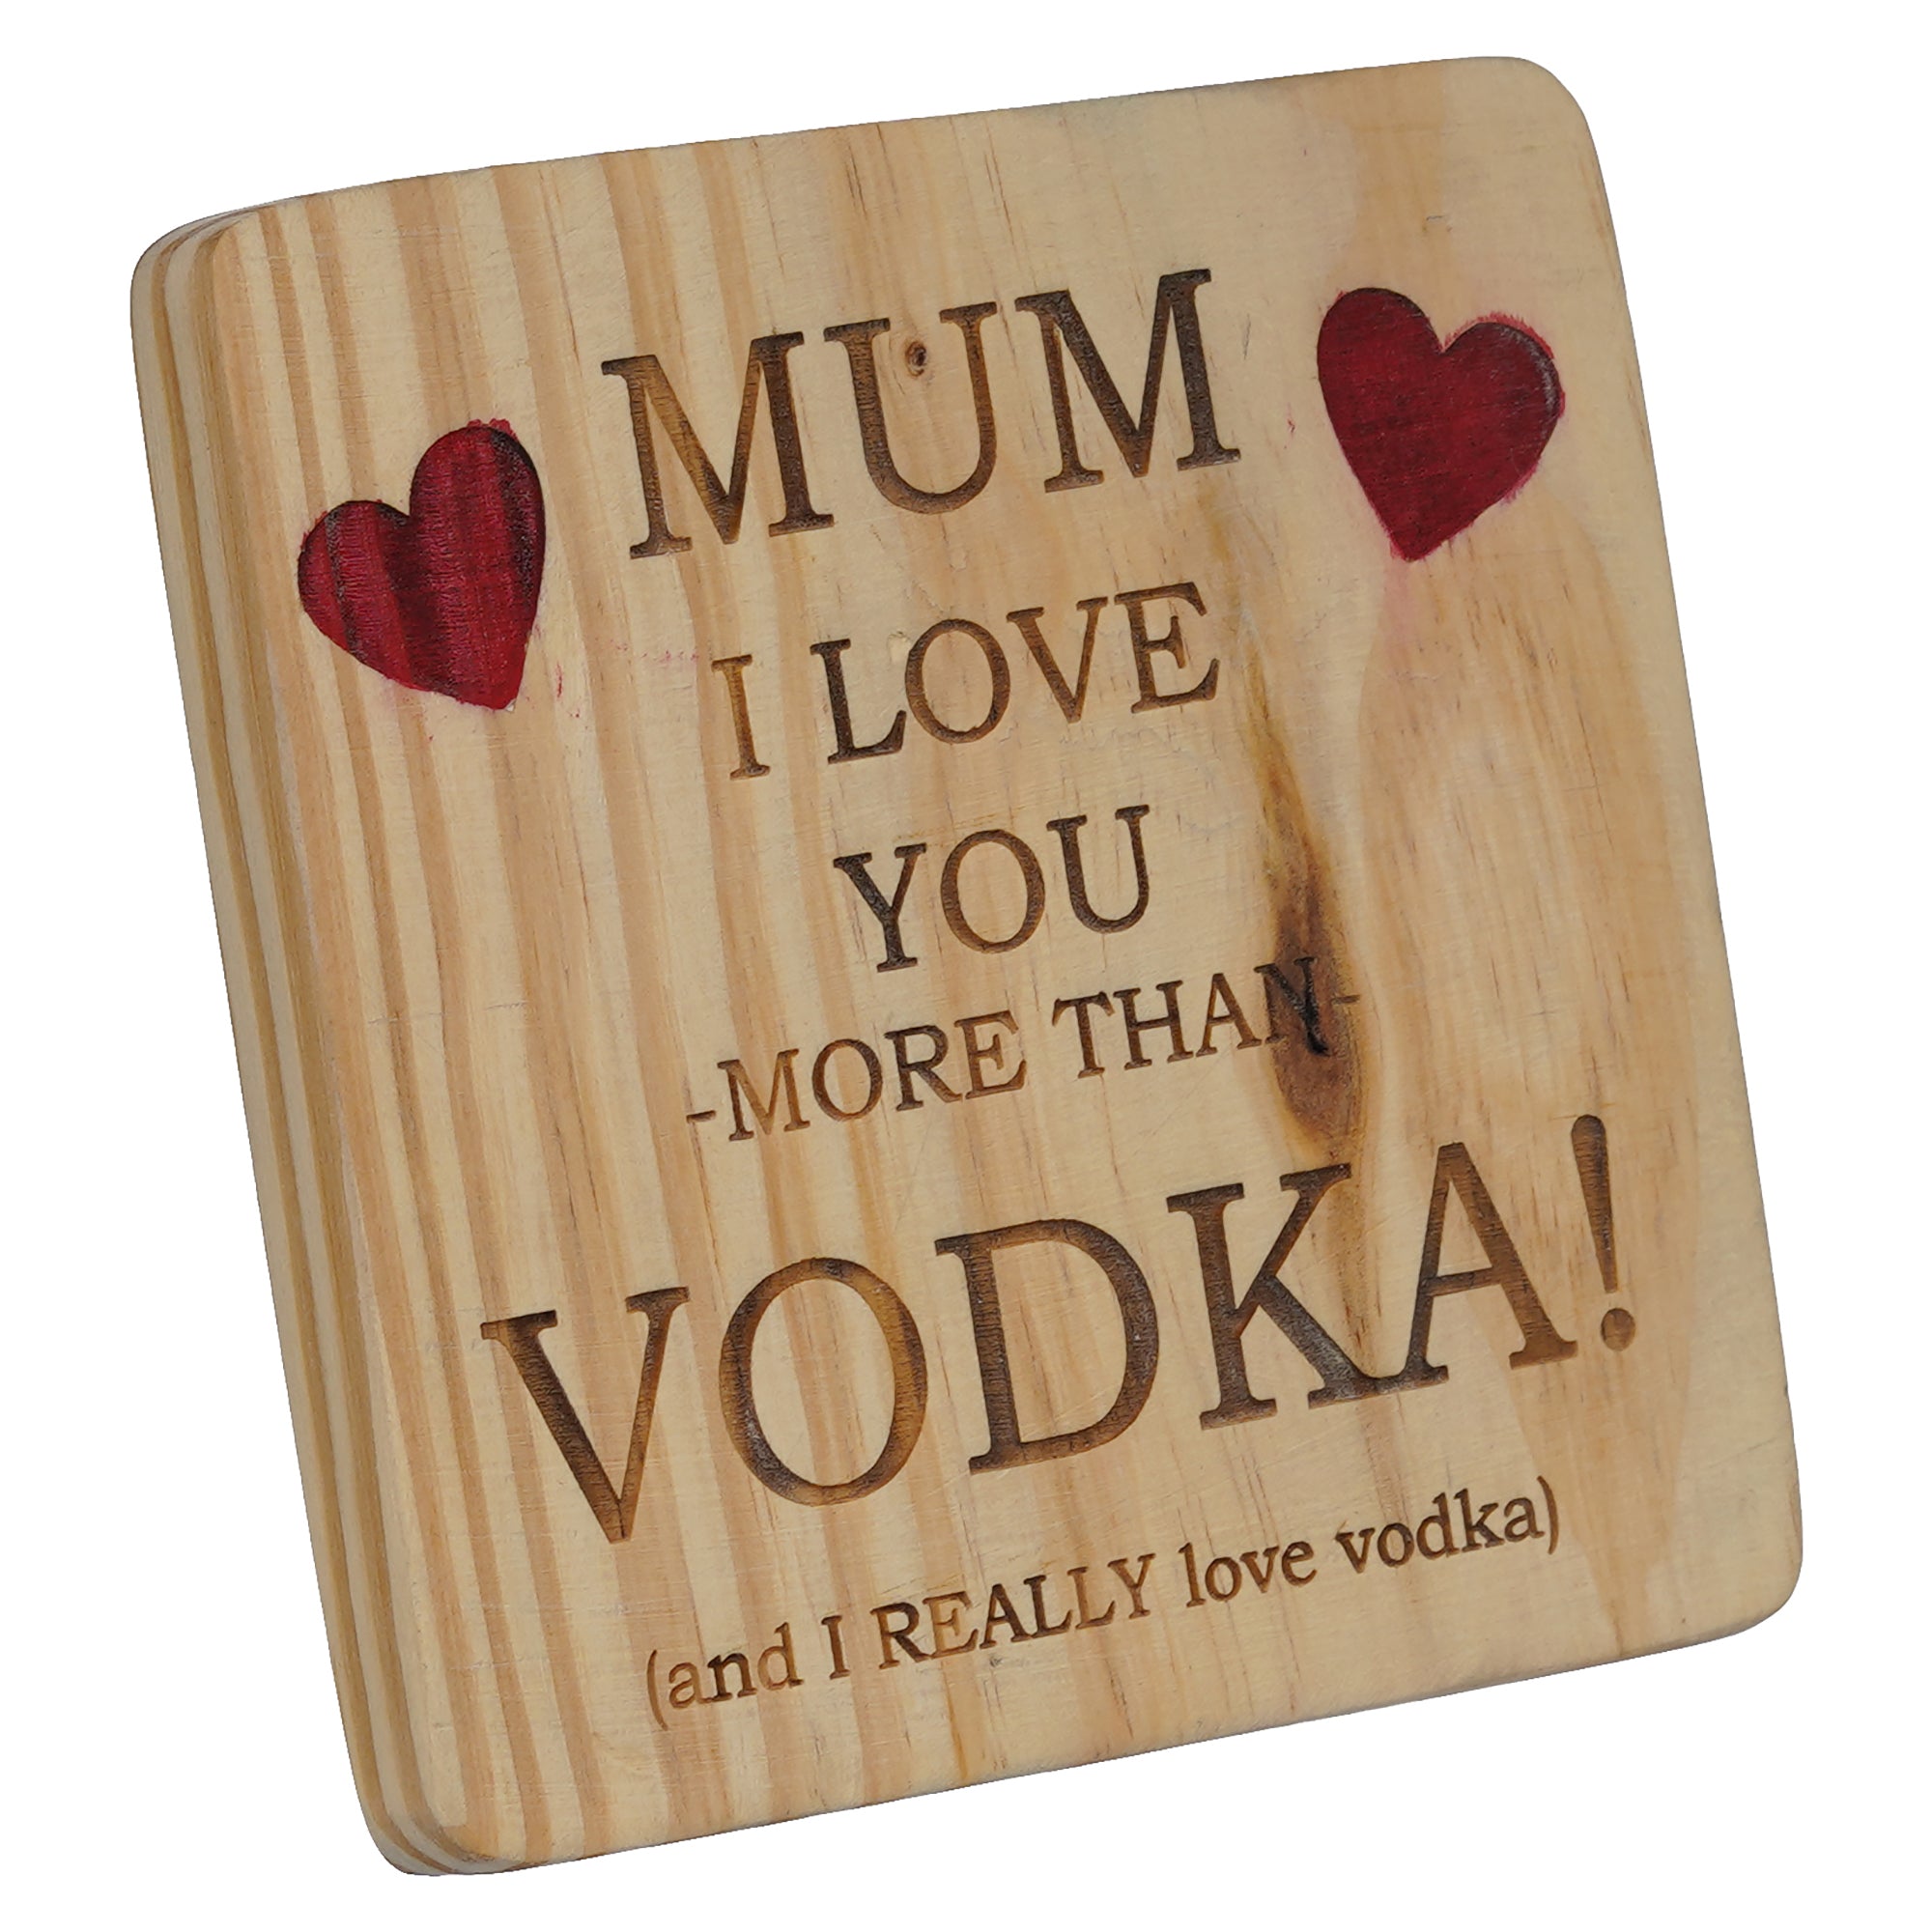 eCraftIndia Brown Wooden "Mum I love you more than Vodka (And I really love Vodka)" Decorative Showpiece Gift 2